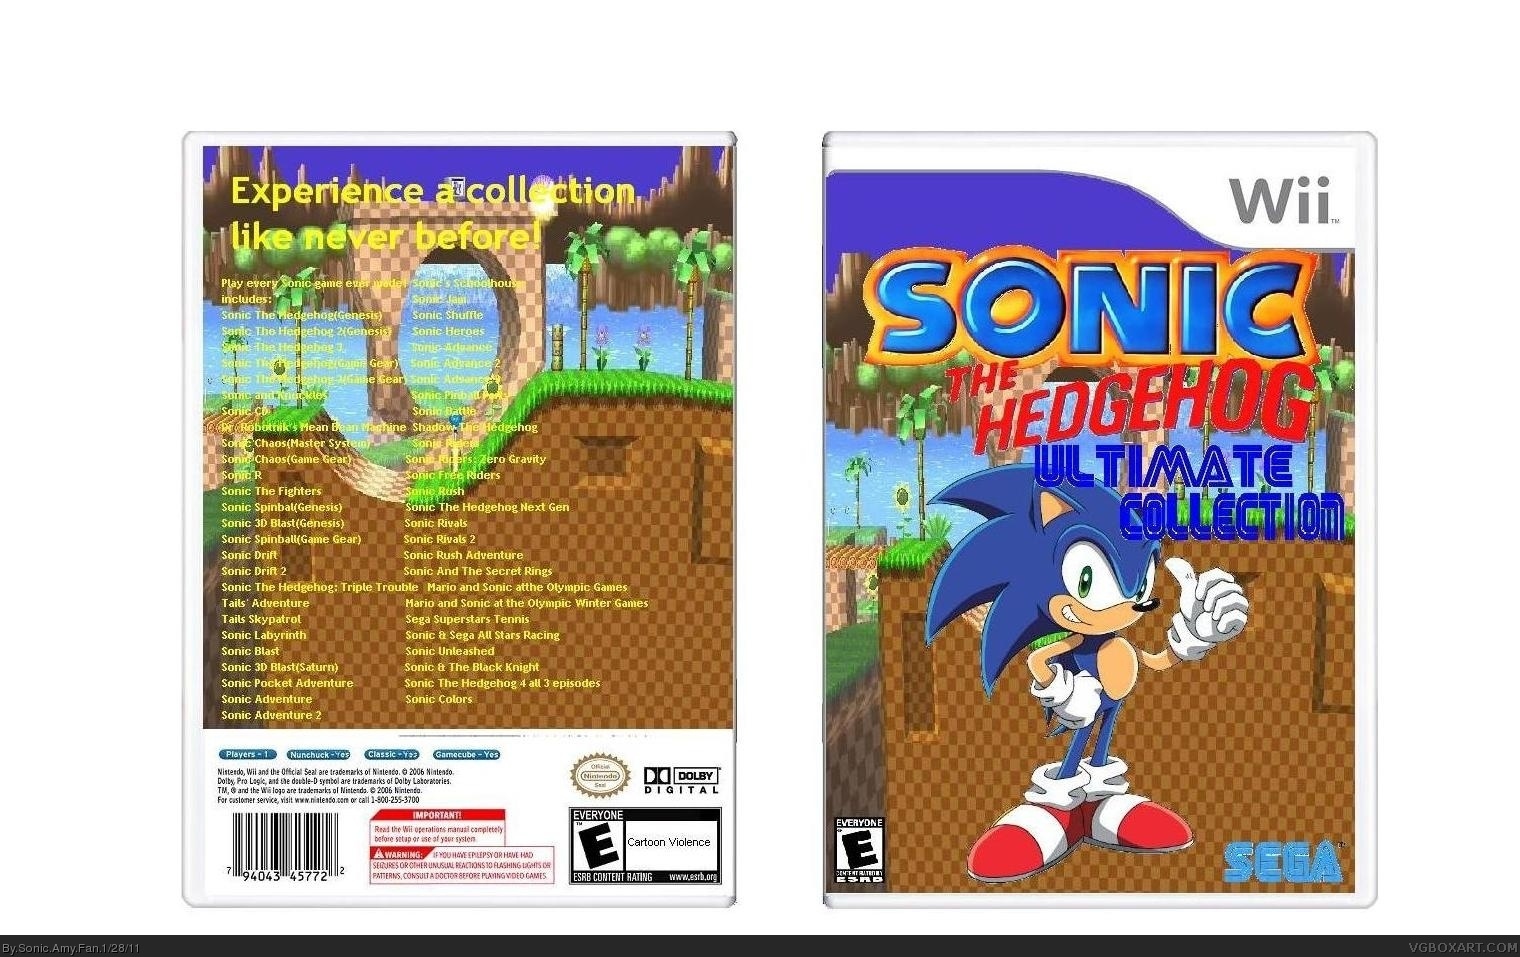 Sonic The Hedgehog Ultimate Collection box cover